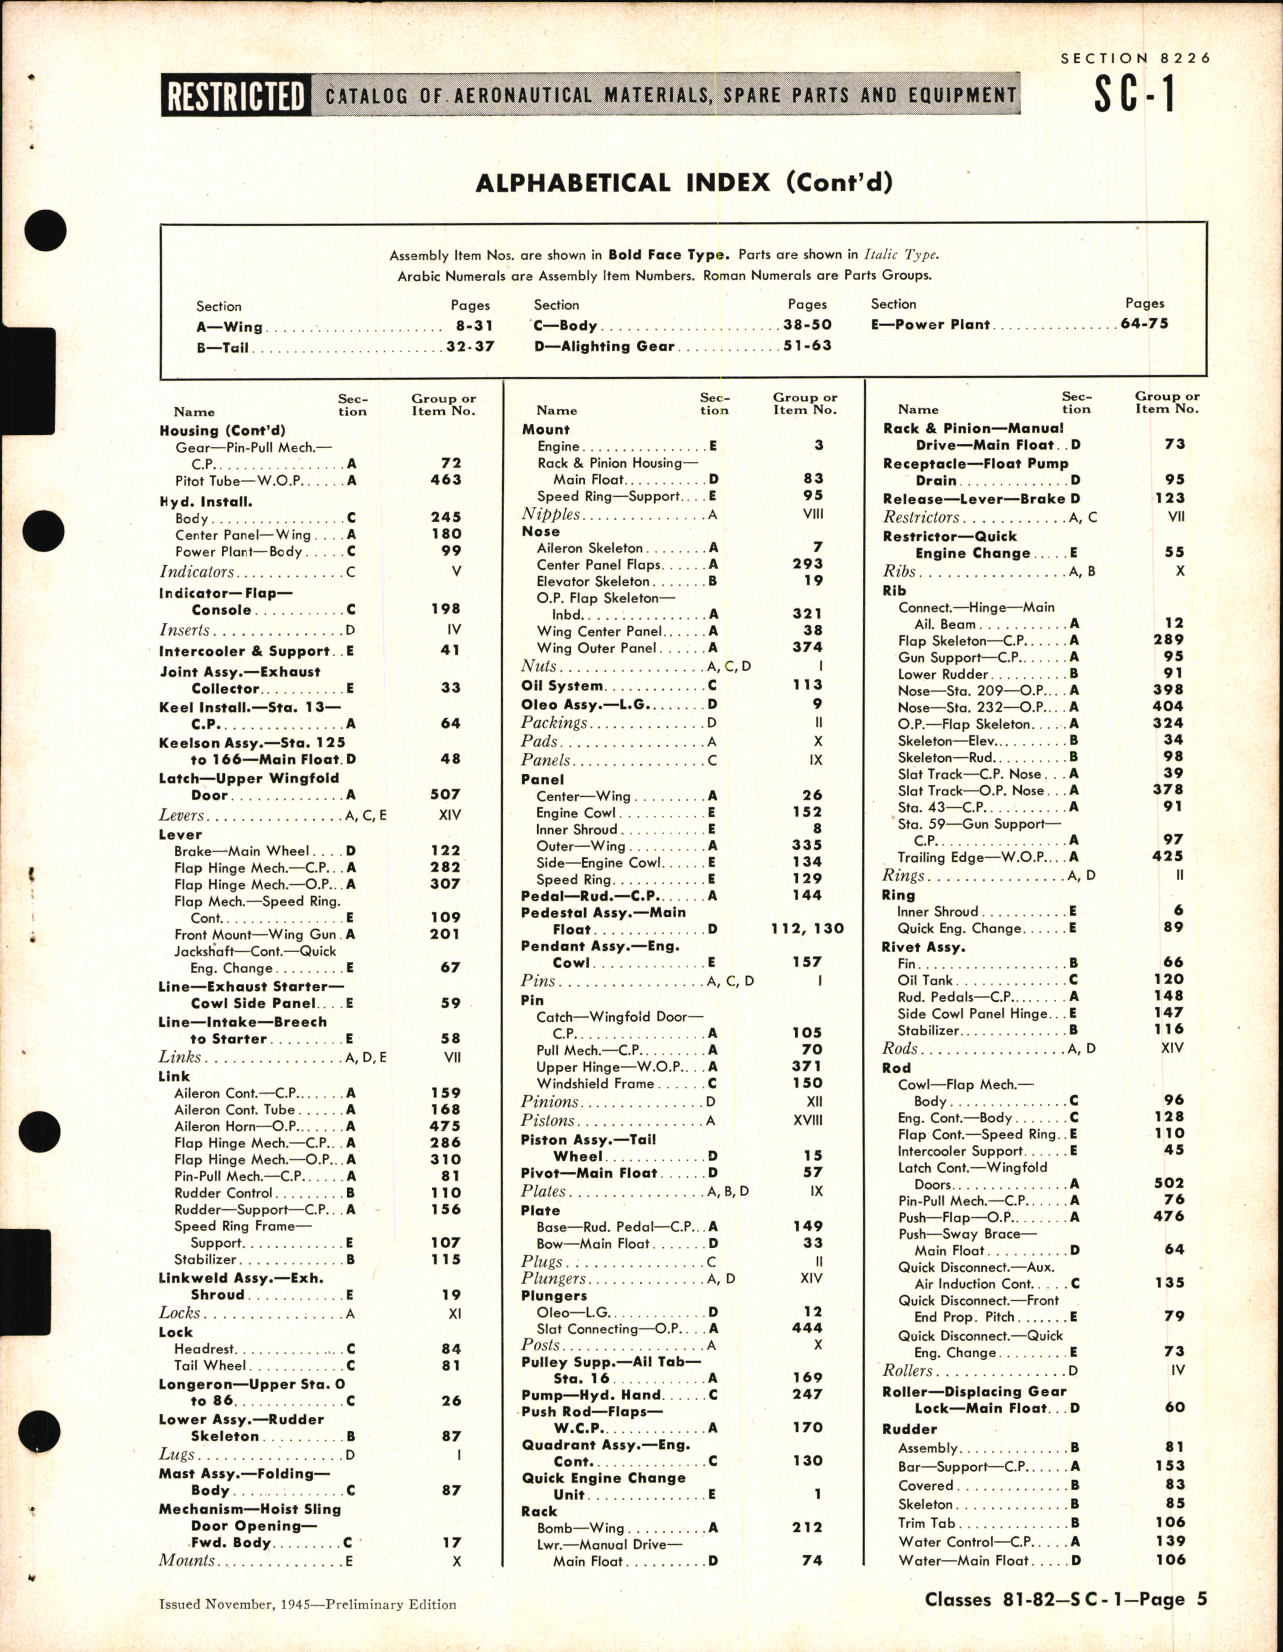 Sample page 5 from AirCorps Library document: SC-1 Curtiss Seahawk, Availability List and Airframe Spare Parts